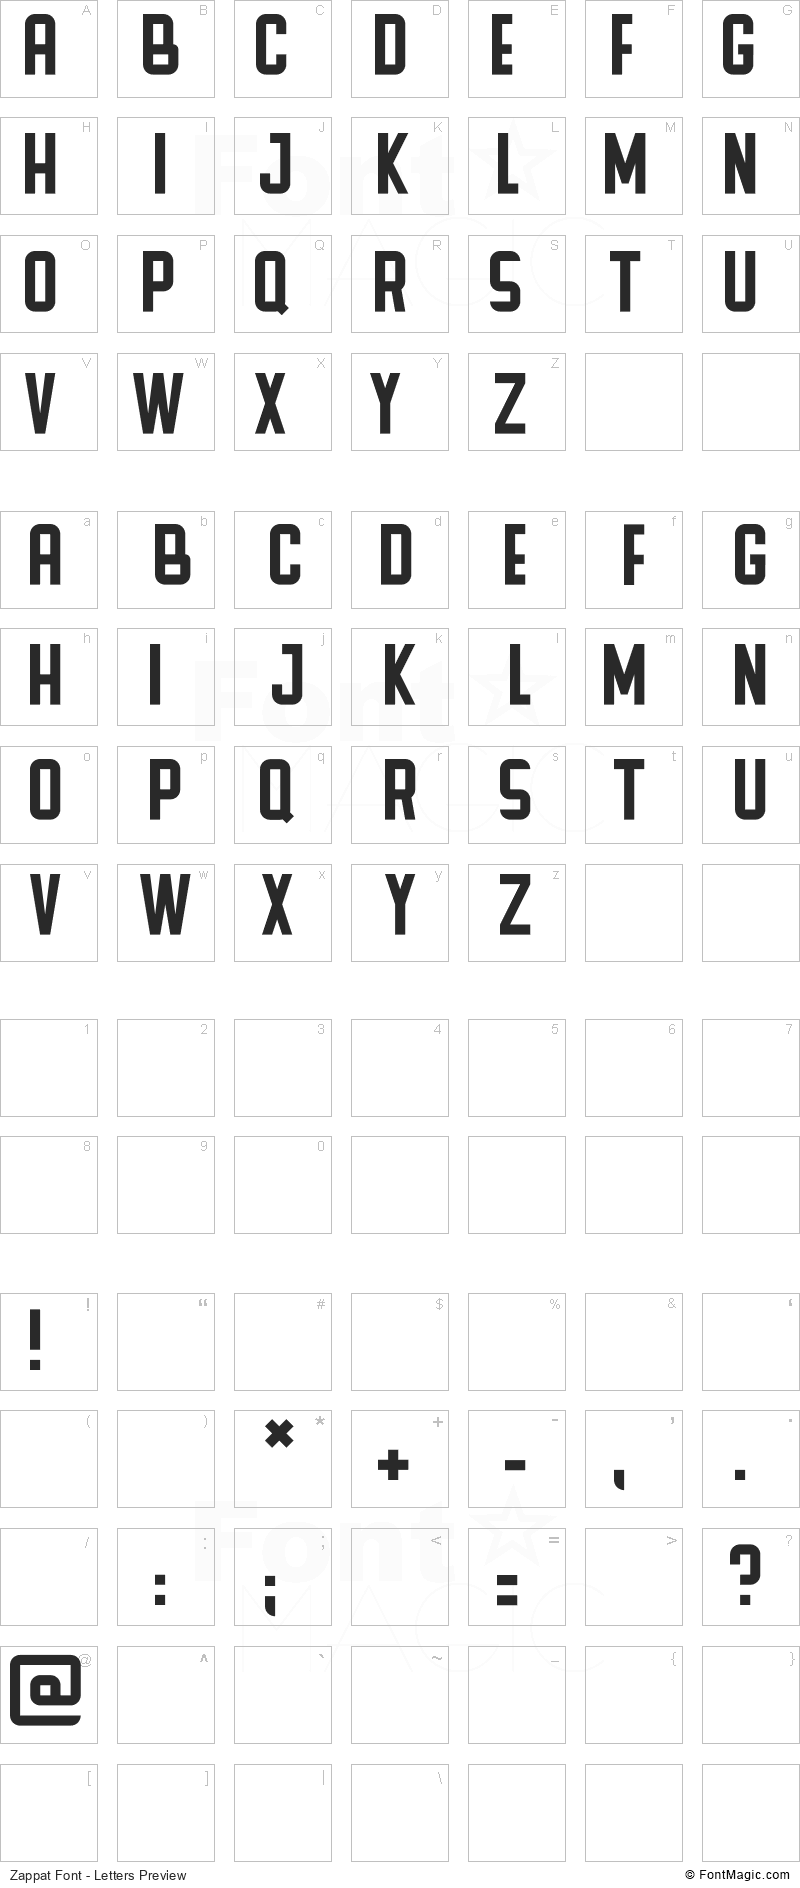 Zappat Font - All Latters Preview Chart